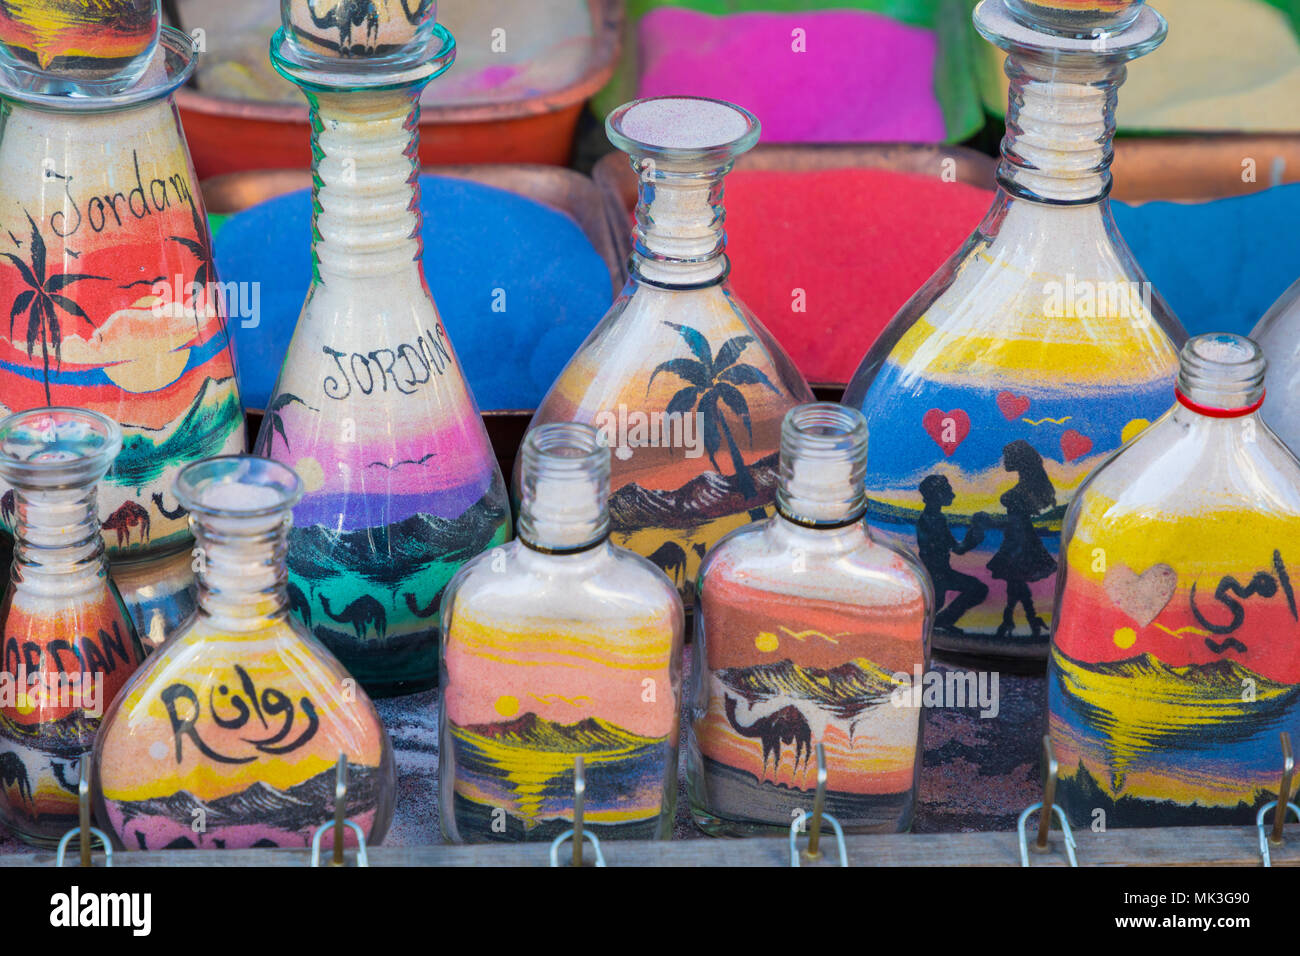 Souvenirs from Jordan - bottles with sand and shapes of desert and camels  Stock Photo - Alamy